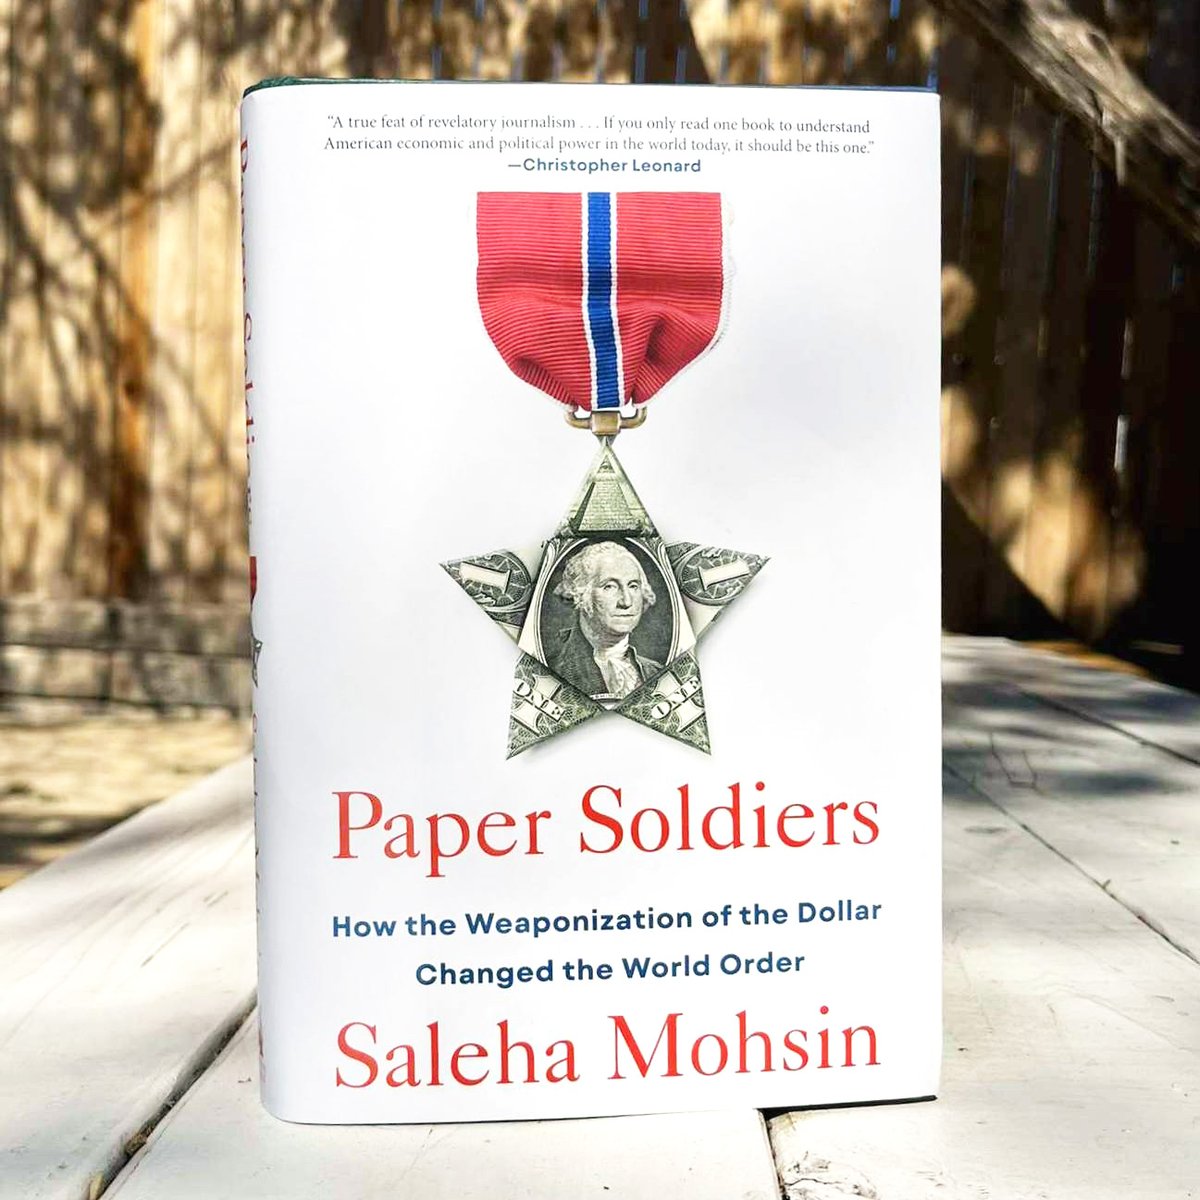 “[An] incisive debut treatise” — Publisher’s Weekly If you love wonky nonfiction, this deep dive on the American dollar is for you. PAPER SOLDIERS offers the inside story of how the dollar became a weapon and what it means for our future. 💸 Out now!